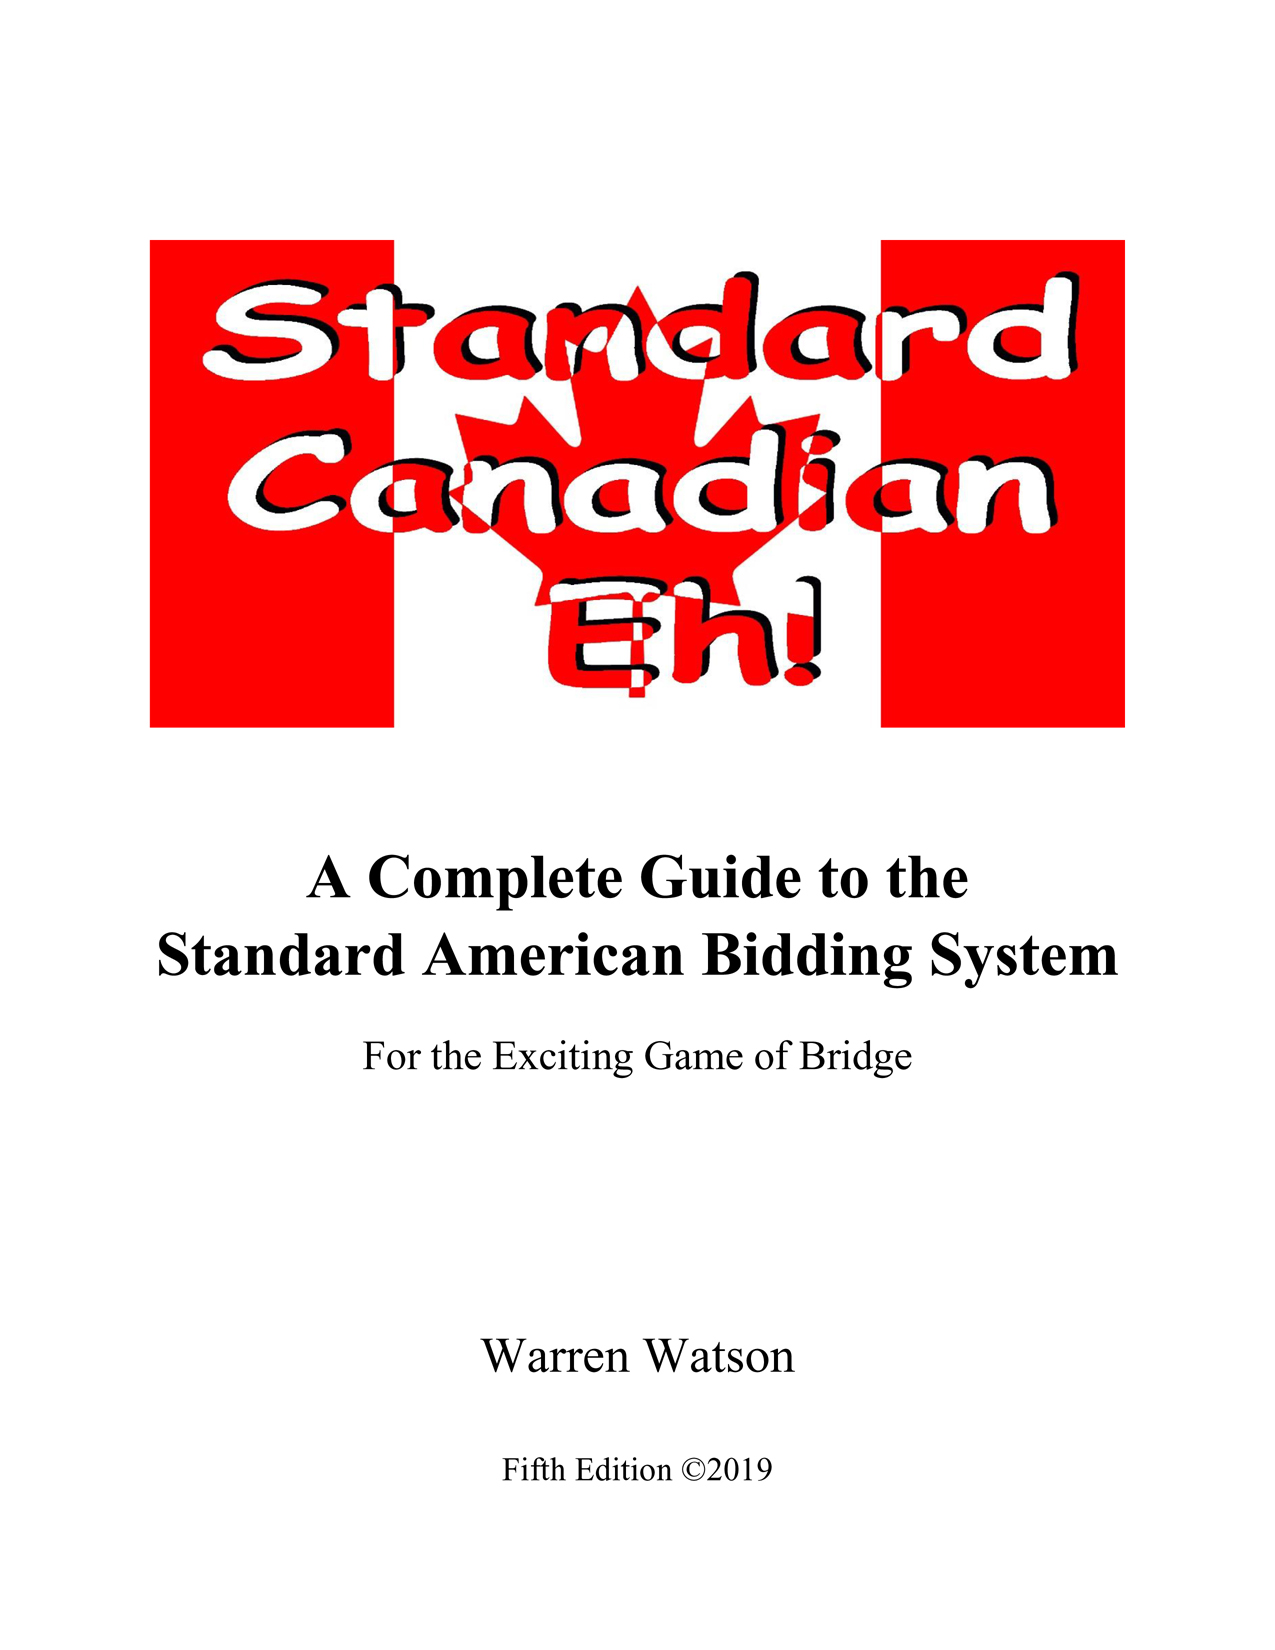 A complete guide to Standard American